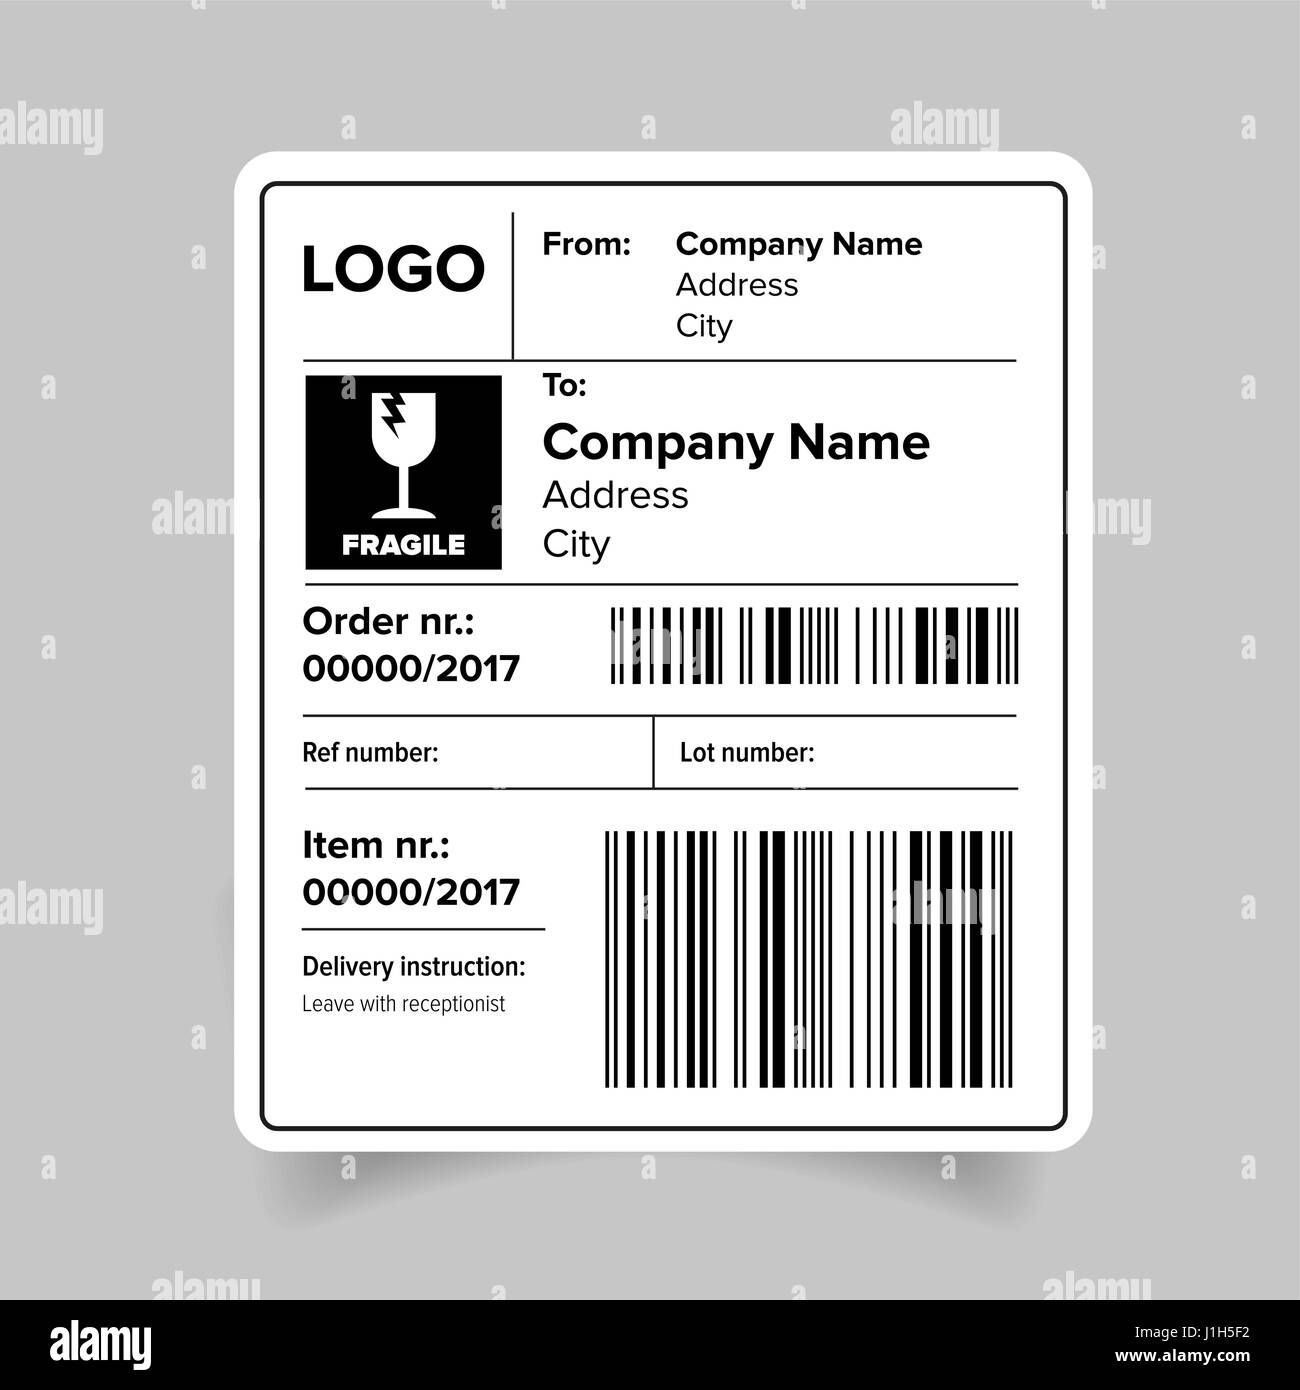 Blank Shipping Label Template from c8.alamy.com